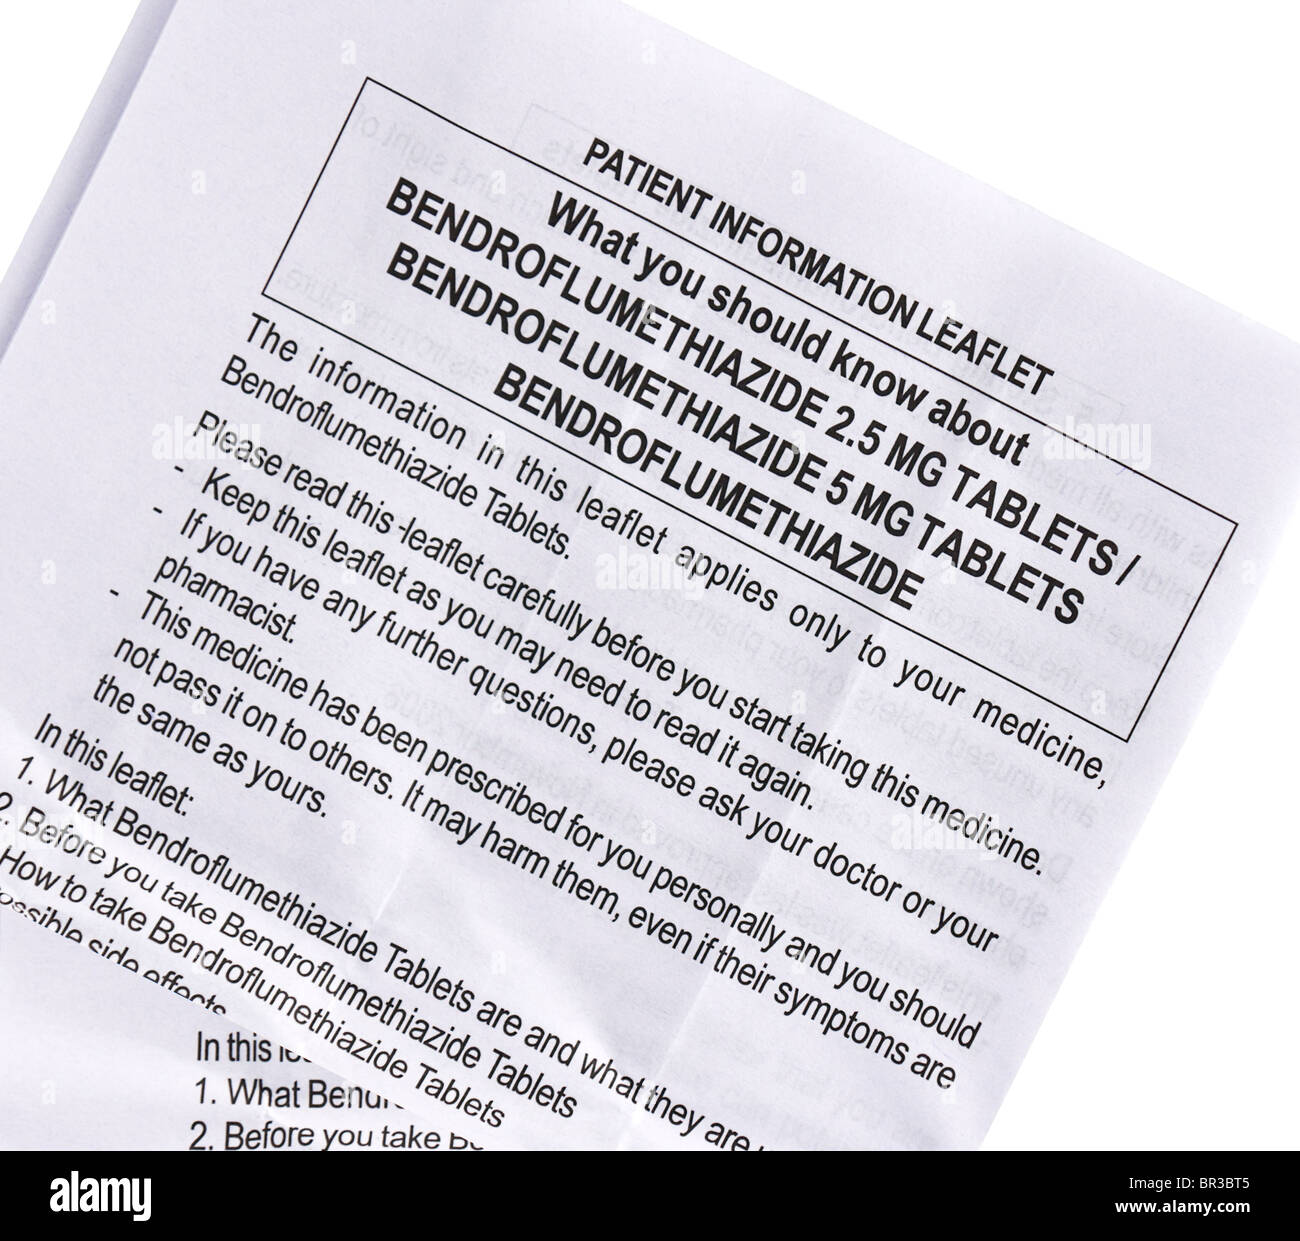 Patient Information leaflet from a packet of Bendroflumethiazide tablets. Stock Photo